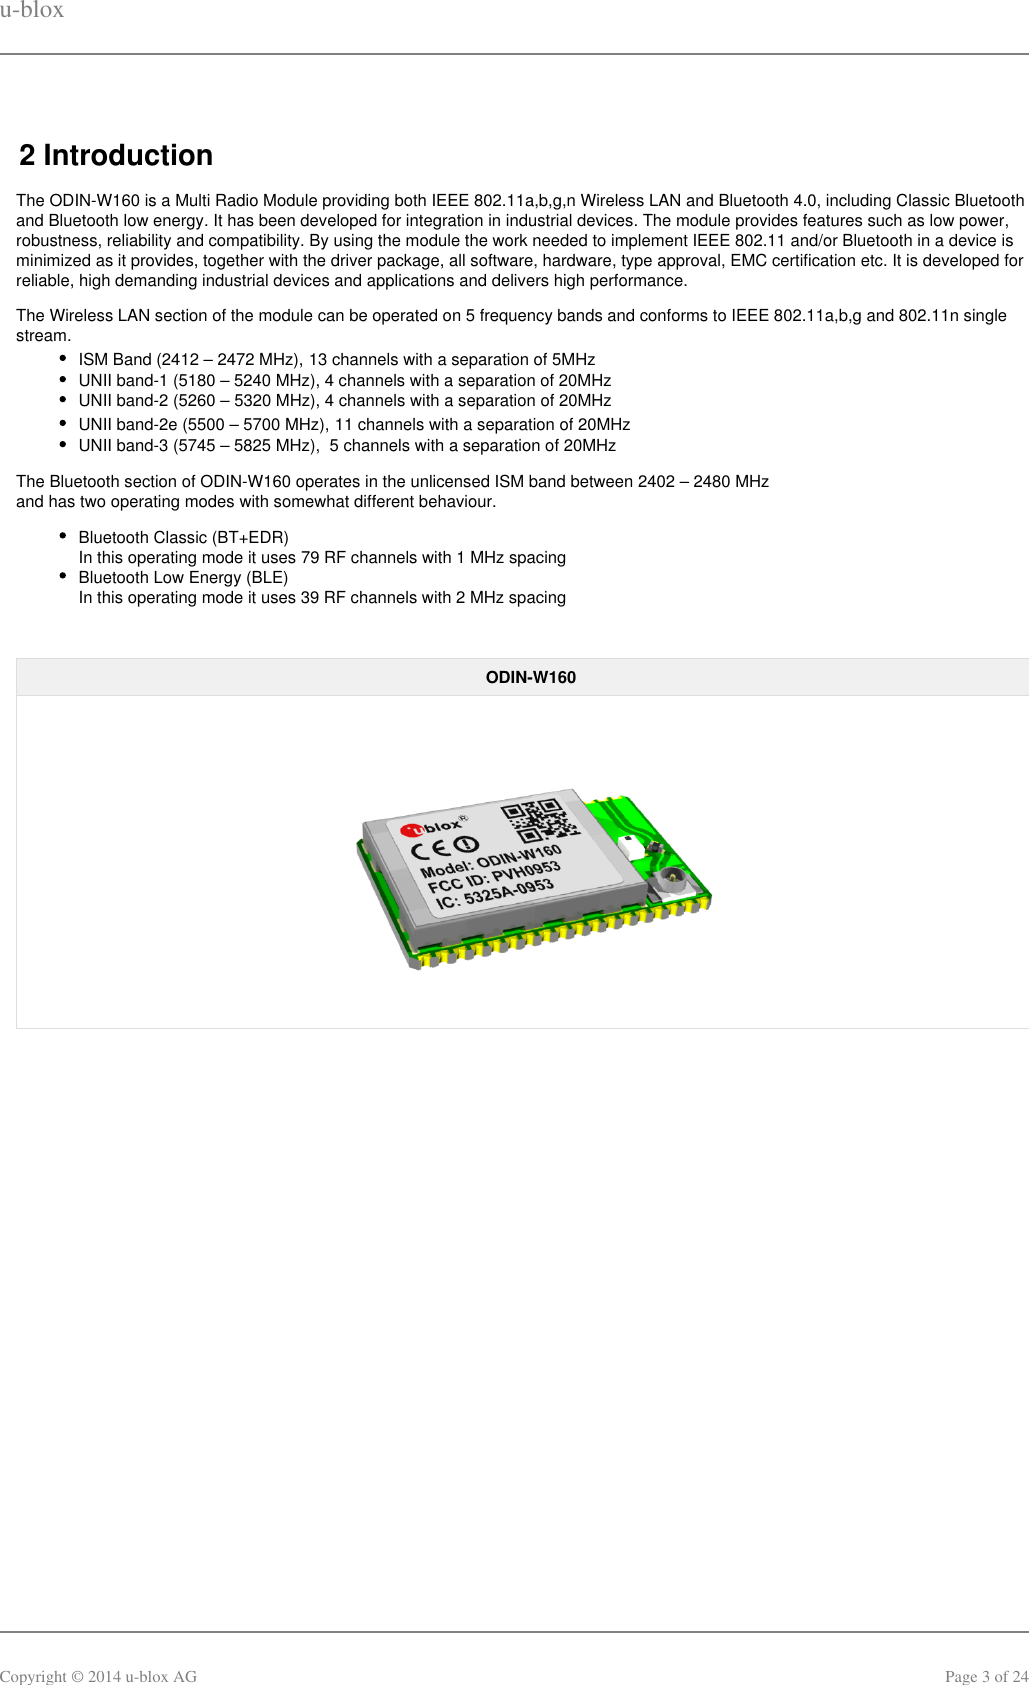 u-bloxCopyright © 2014 u-blox AG Page 3 of 242 IntroductionThe ODIN-W160 is a Multi Radio Module providing both IEEE 802.11a,b,g,n Wireless LAN and Bluetooth 4.0, including Classic Bluetooth. It has been developed for integration in industrial devices. The module provides features such as low power,and Bluetooth low energyrobustness, reliability and compatibility. By using the module the work needed to implement IEEE 802.11 and/or Bluetooth in a device isminimized as it provides, together with the driver package, all software, hardware, type approval, EMC certification etc. It is developed forreliable, high demanding industrial devices and applications and delivers high performance.The Wireless LAN section of the module can be operated on 5 frequency bands and conforms to IEEE 802.11a,b,g and 802.11n singlestream.ISM Band (2412 – 2472 MHz), 13 channels with a separation of 5MHzUNII band-1 (5180 – 5240 MHz), 4 channels with a separation of 20MHzUNII band-2 (5260 5320 MHz), 4 channels with a separation of 20MHz – UNII band-2e (5500 – 5700 MHz), 11 channels with a separation of 20MHzUNII band-3 (5745 – 5825 MHz), 5 channels with a separation of 20MHz  The Bluetooth section of ODIN-W160 operates in the unlicensed ISM band between 2402 – 2480 MHz hasand   two operating modes  . with somewhat different behaviour  Bluetooth Classic (BT+EDR)In this operating mode it uses 79 RF channels with 1 MHz spacingBluetooth Low Energy (BLE)In this operating mode it uses 39 RF channels with 2 MHz spacing ODIN-W160